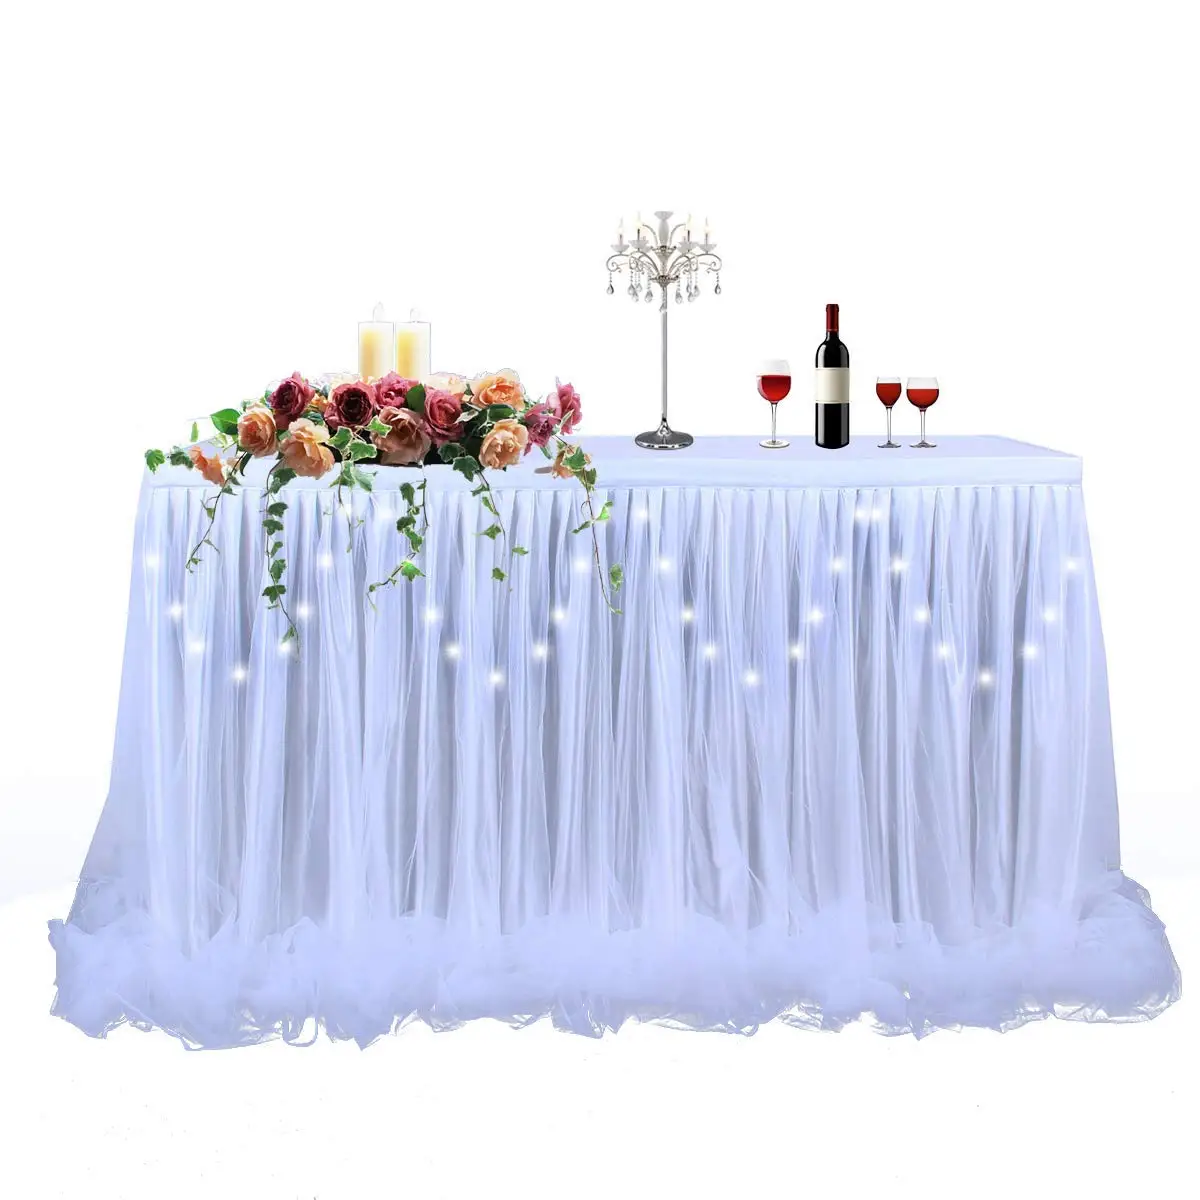 Cheap Table Decoration Ideas For Birthday Find Table Decoration Ideas For Birthday Deals On Line At Alibaba Com,Why Is My Dog So Hyper After A Bath